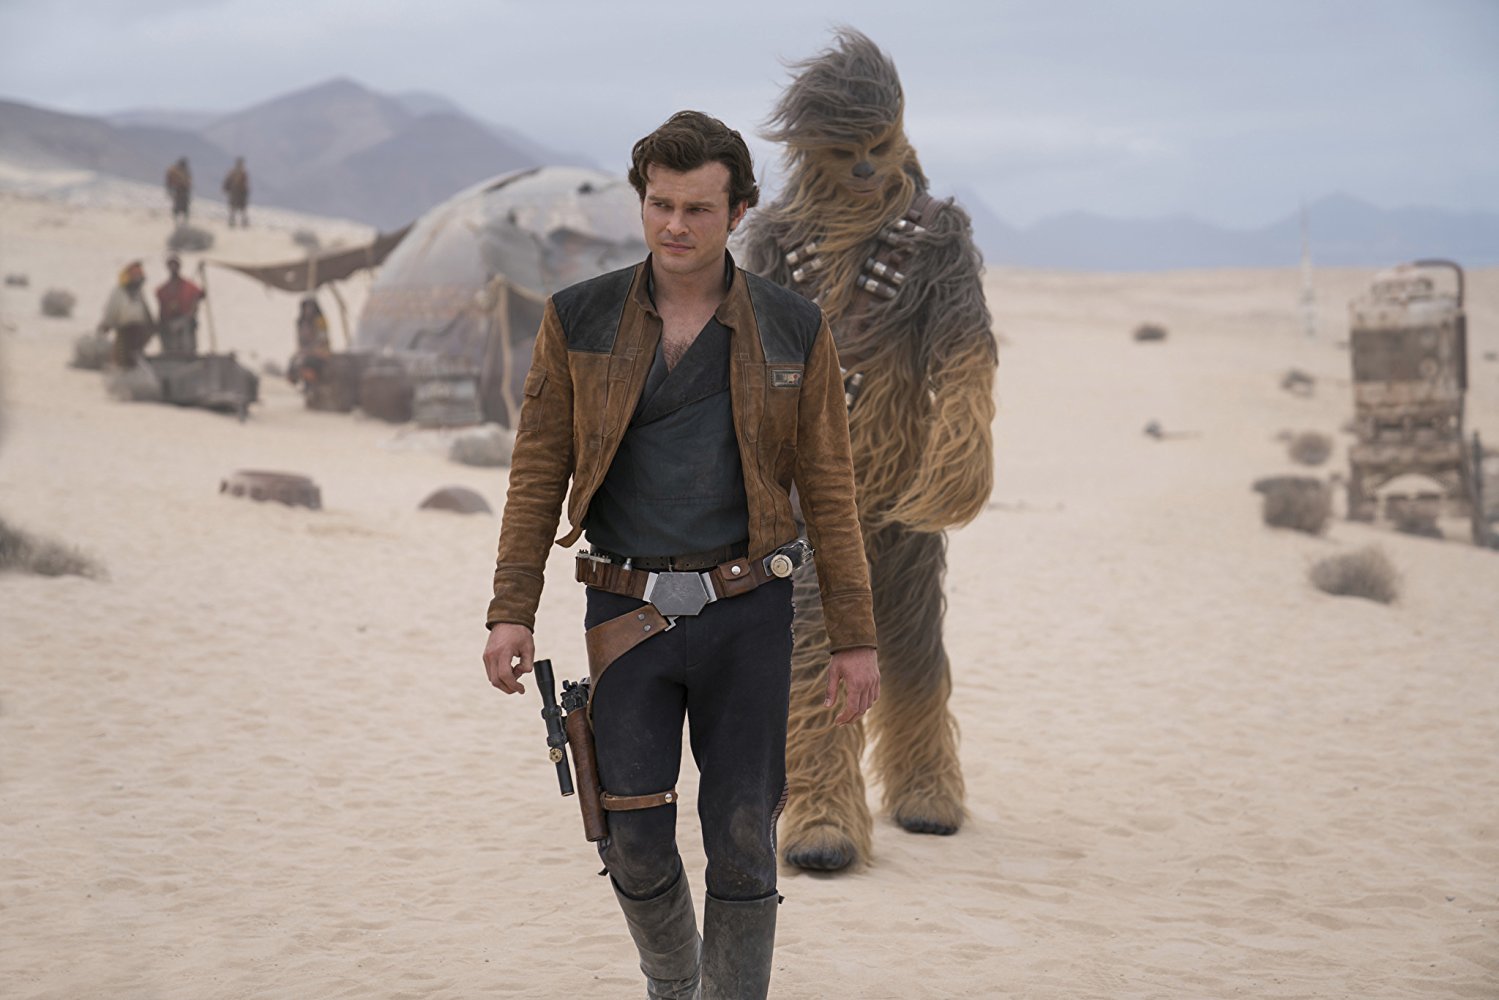 MOVIES: Solo: A Star Wars Story - Review